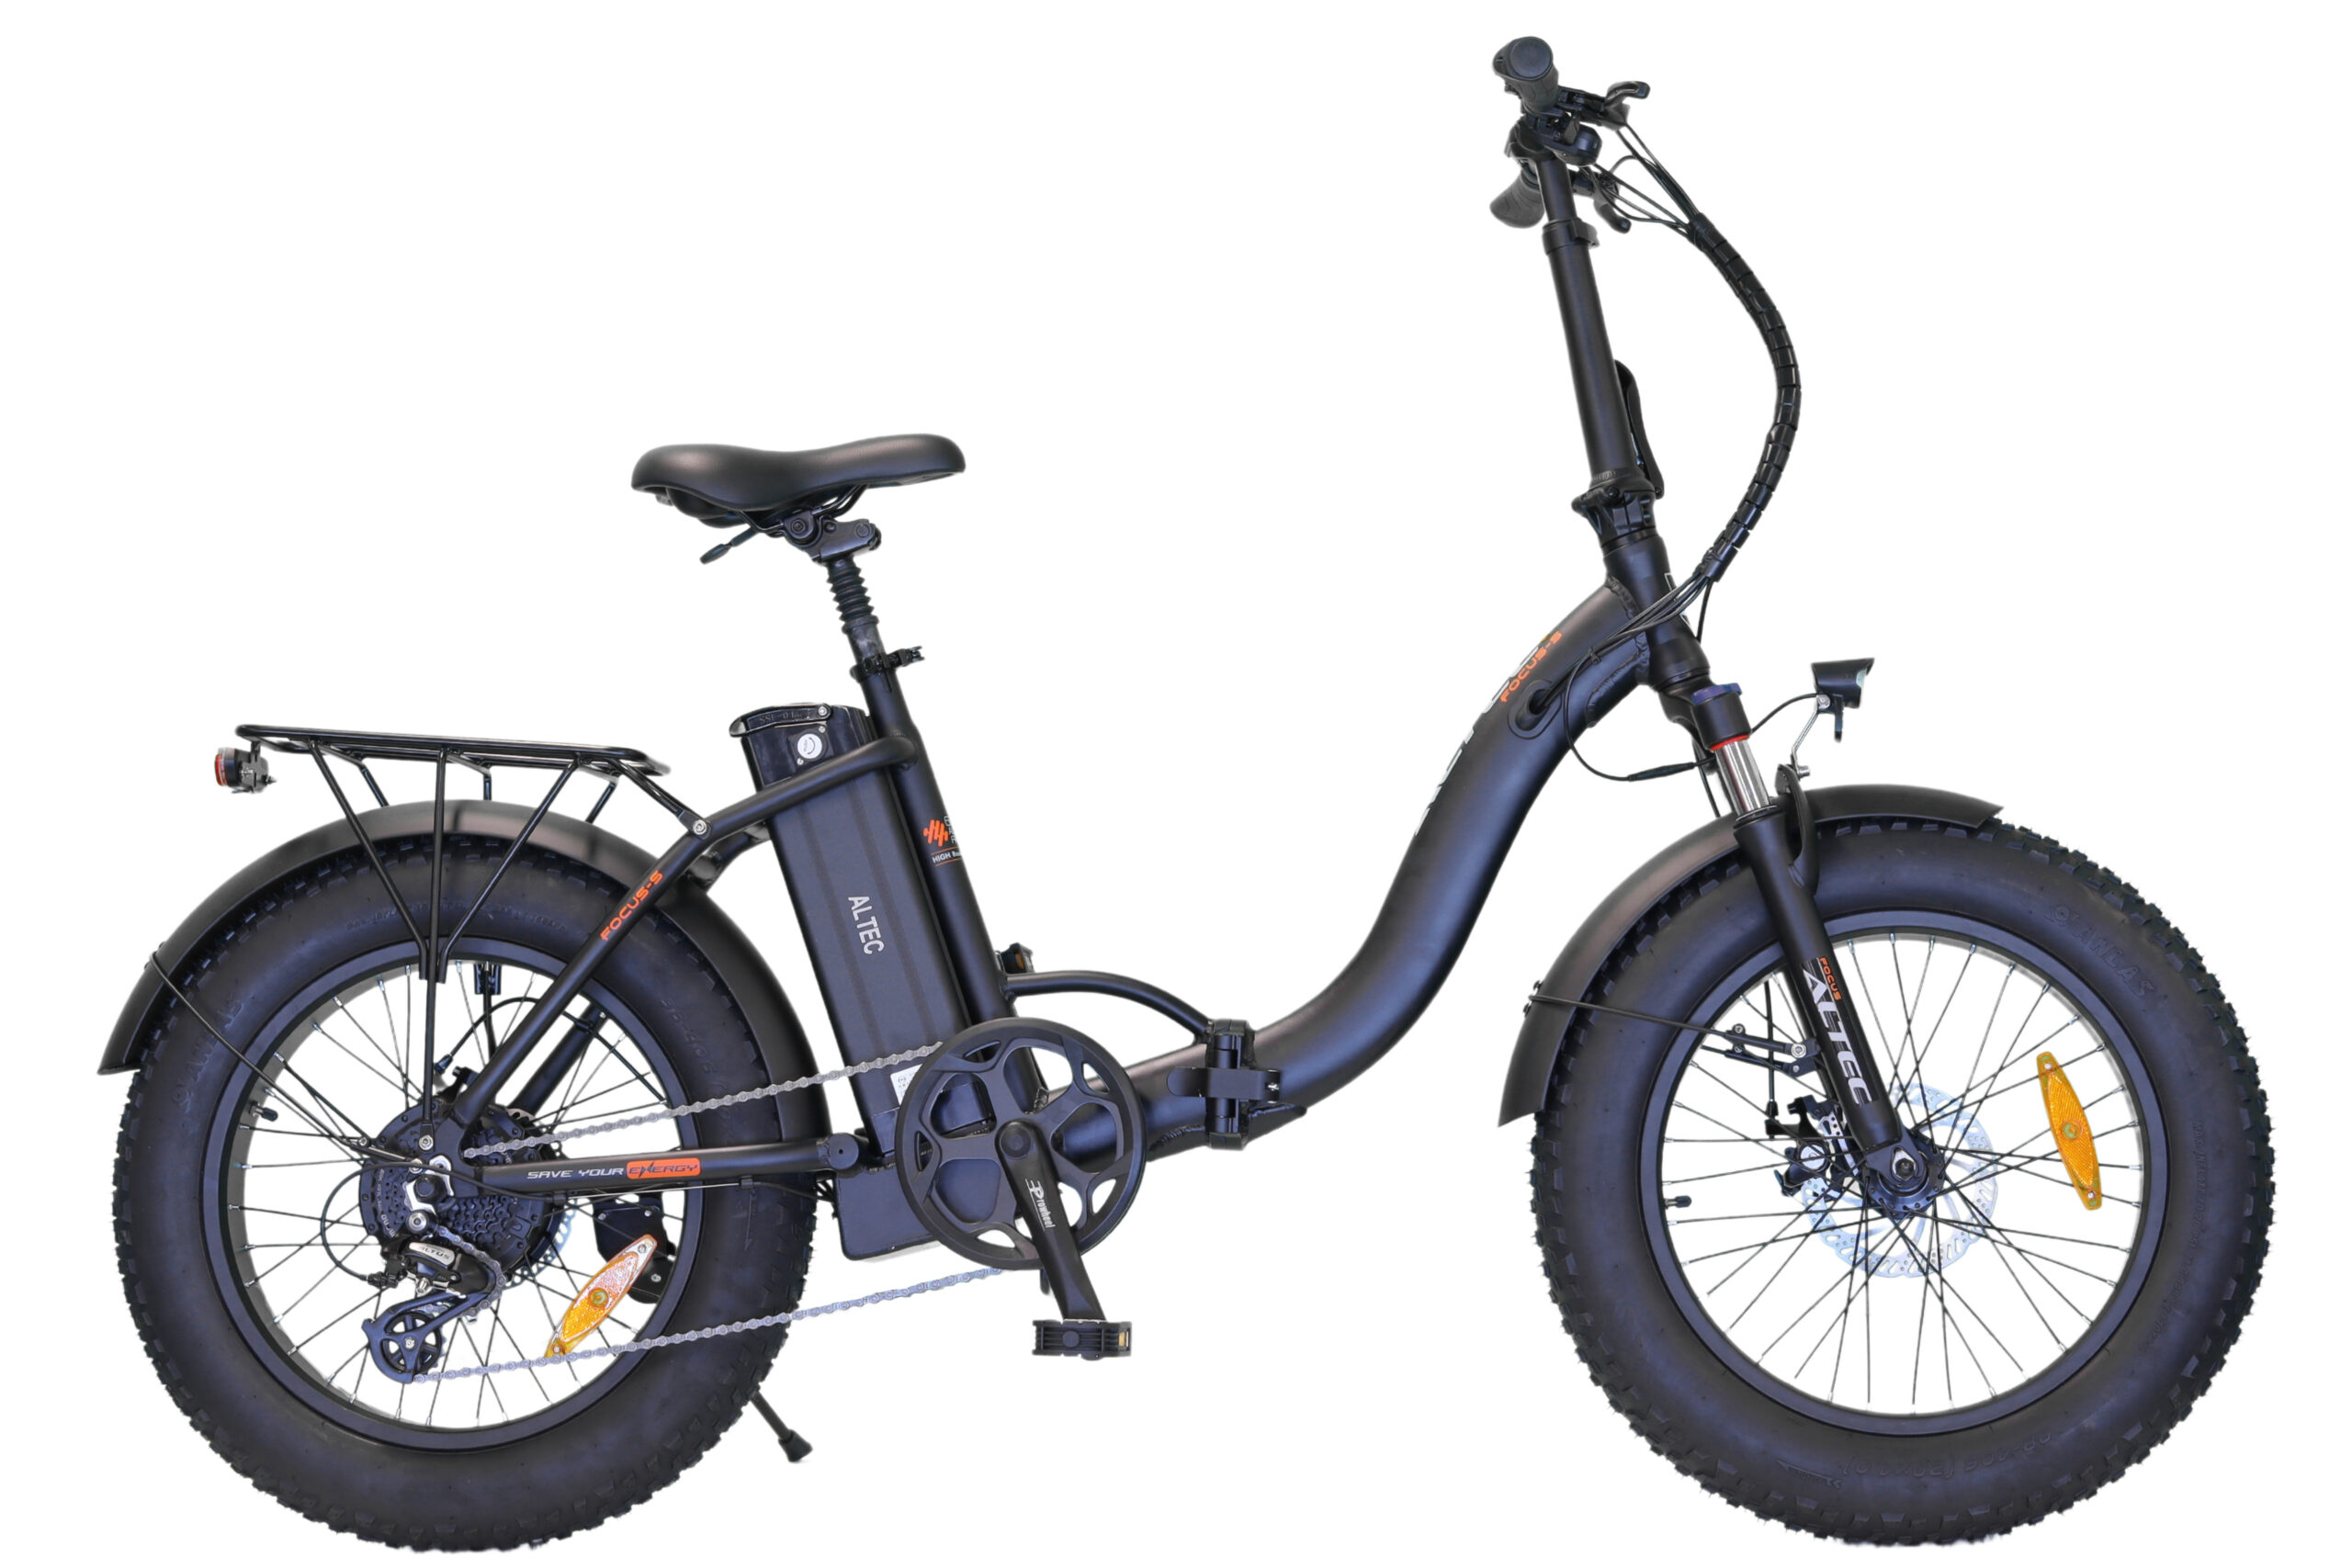 Altec Focus-S E-Bike Fatbike Vouwfiets 468Wh 8 Speed Achtermotor 130RX 60Nm